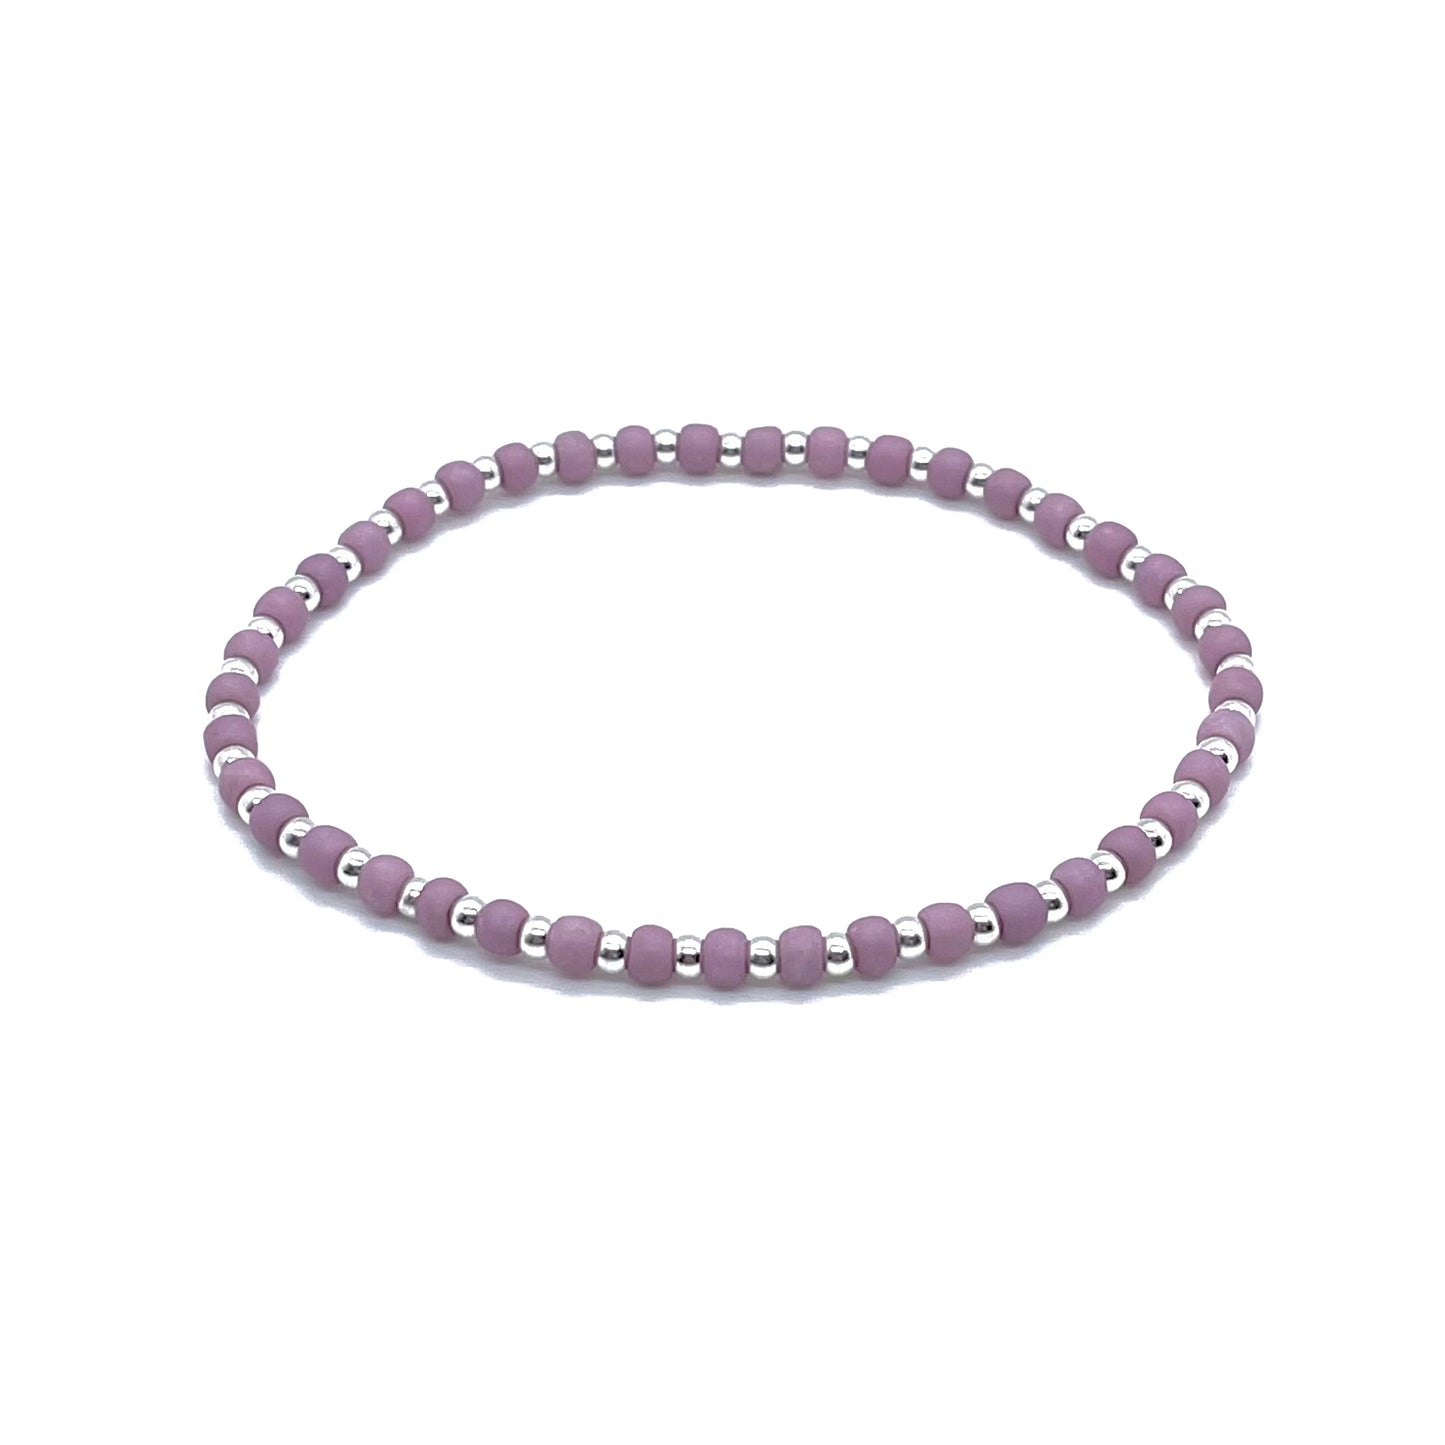 Silver ankle bracelets with 3mm balls and alternating matte lilac mauve seed beads on elastic stretch cord.